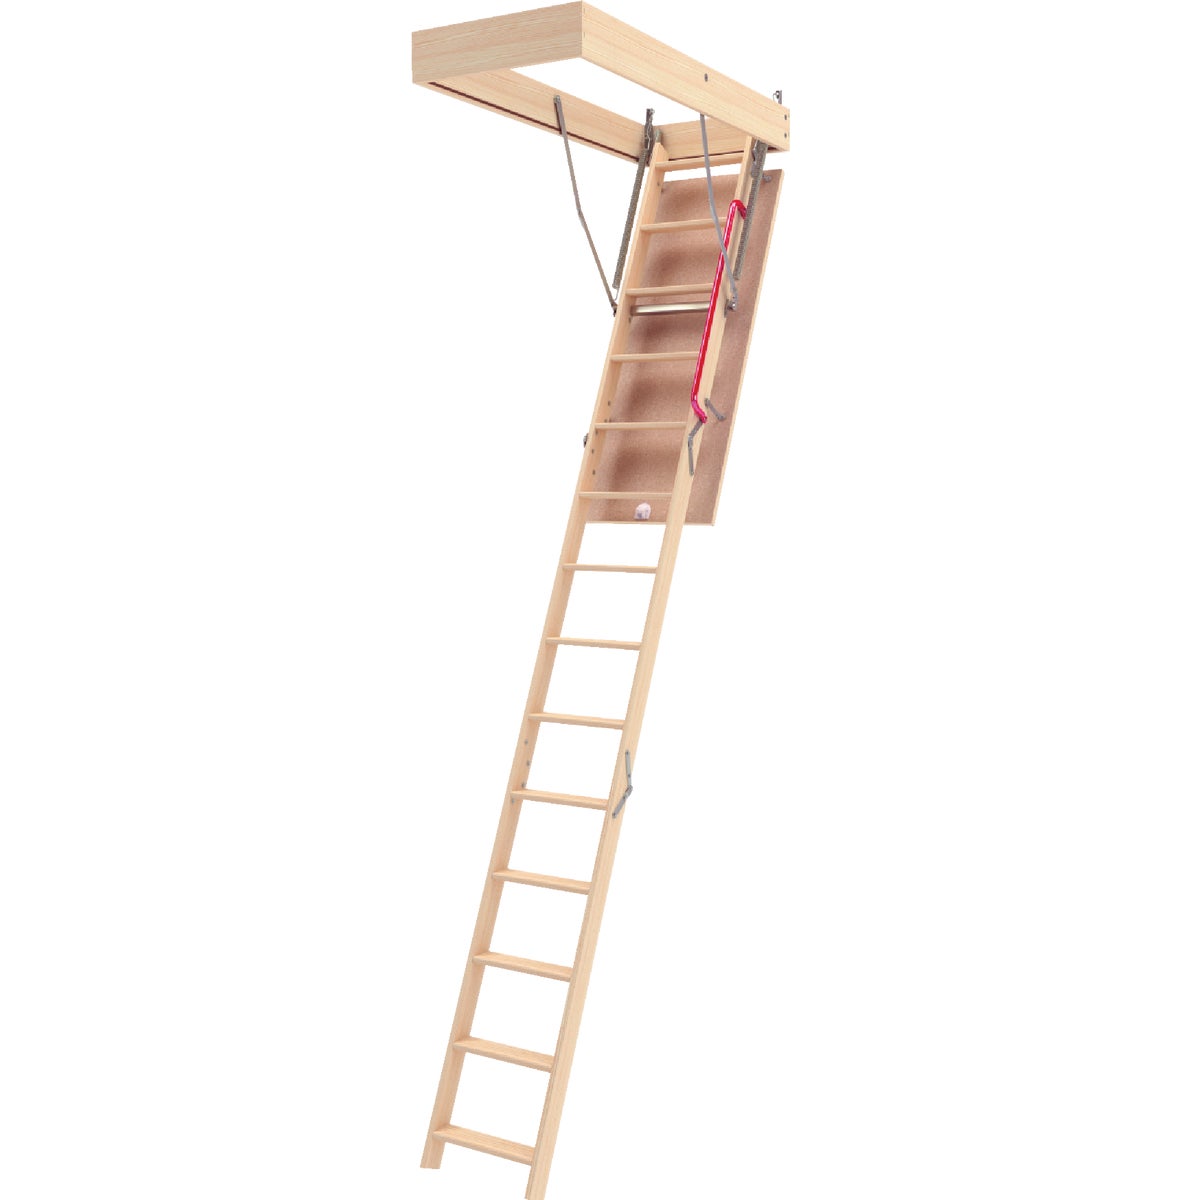 Fakro 7 Ft. 10 In. to 10 Ft. 1 In. 22-1/2 In. x 54 In. Wood Attic Stairs, 350 Lb. Load